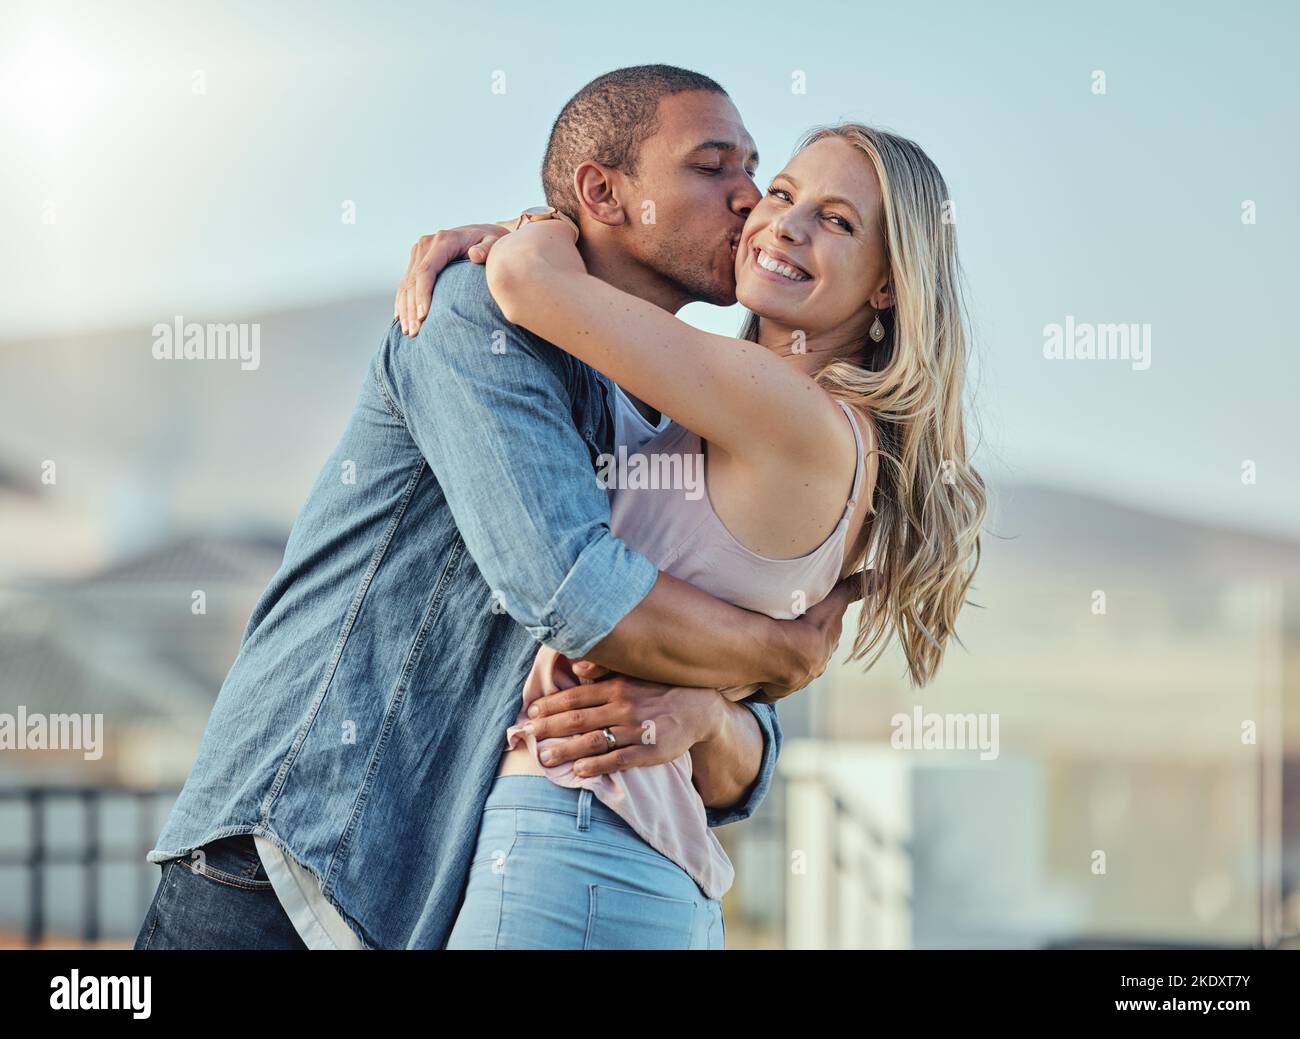 Interracial man and woman, love and kiss outside feeling happy, in love and caring in the city. Romance, romantic and boyfriend and girlfriend Stock Photo